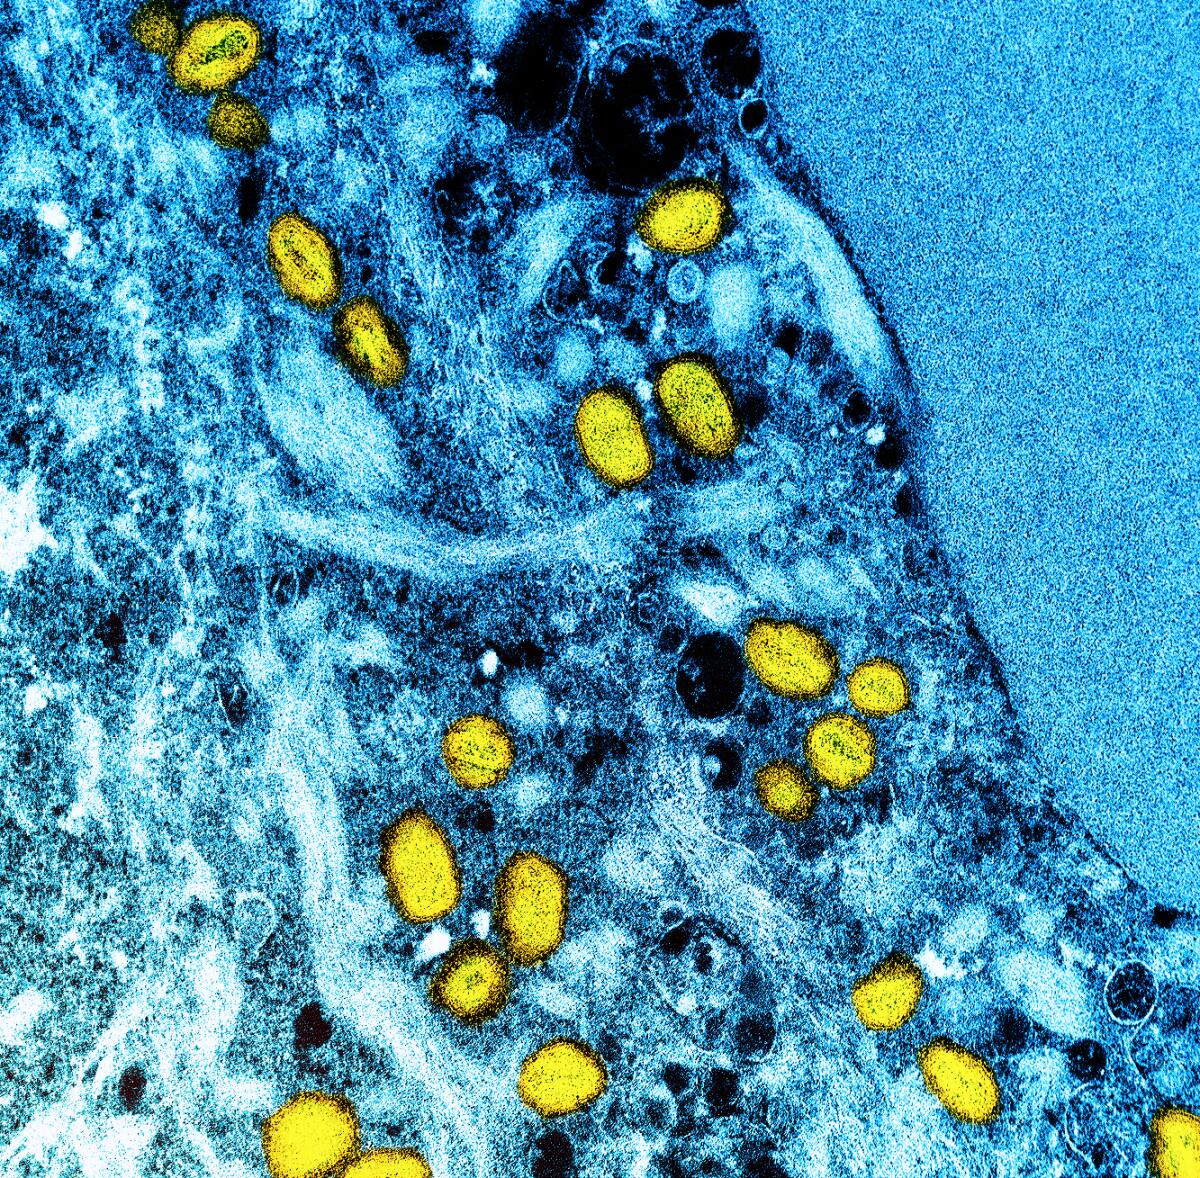 A microscope photo of a cell, shown in blue, infected by monkeypox particles, in yellow